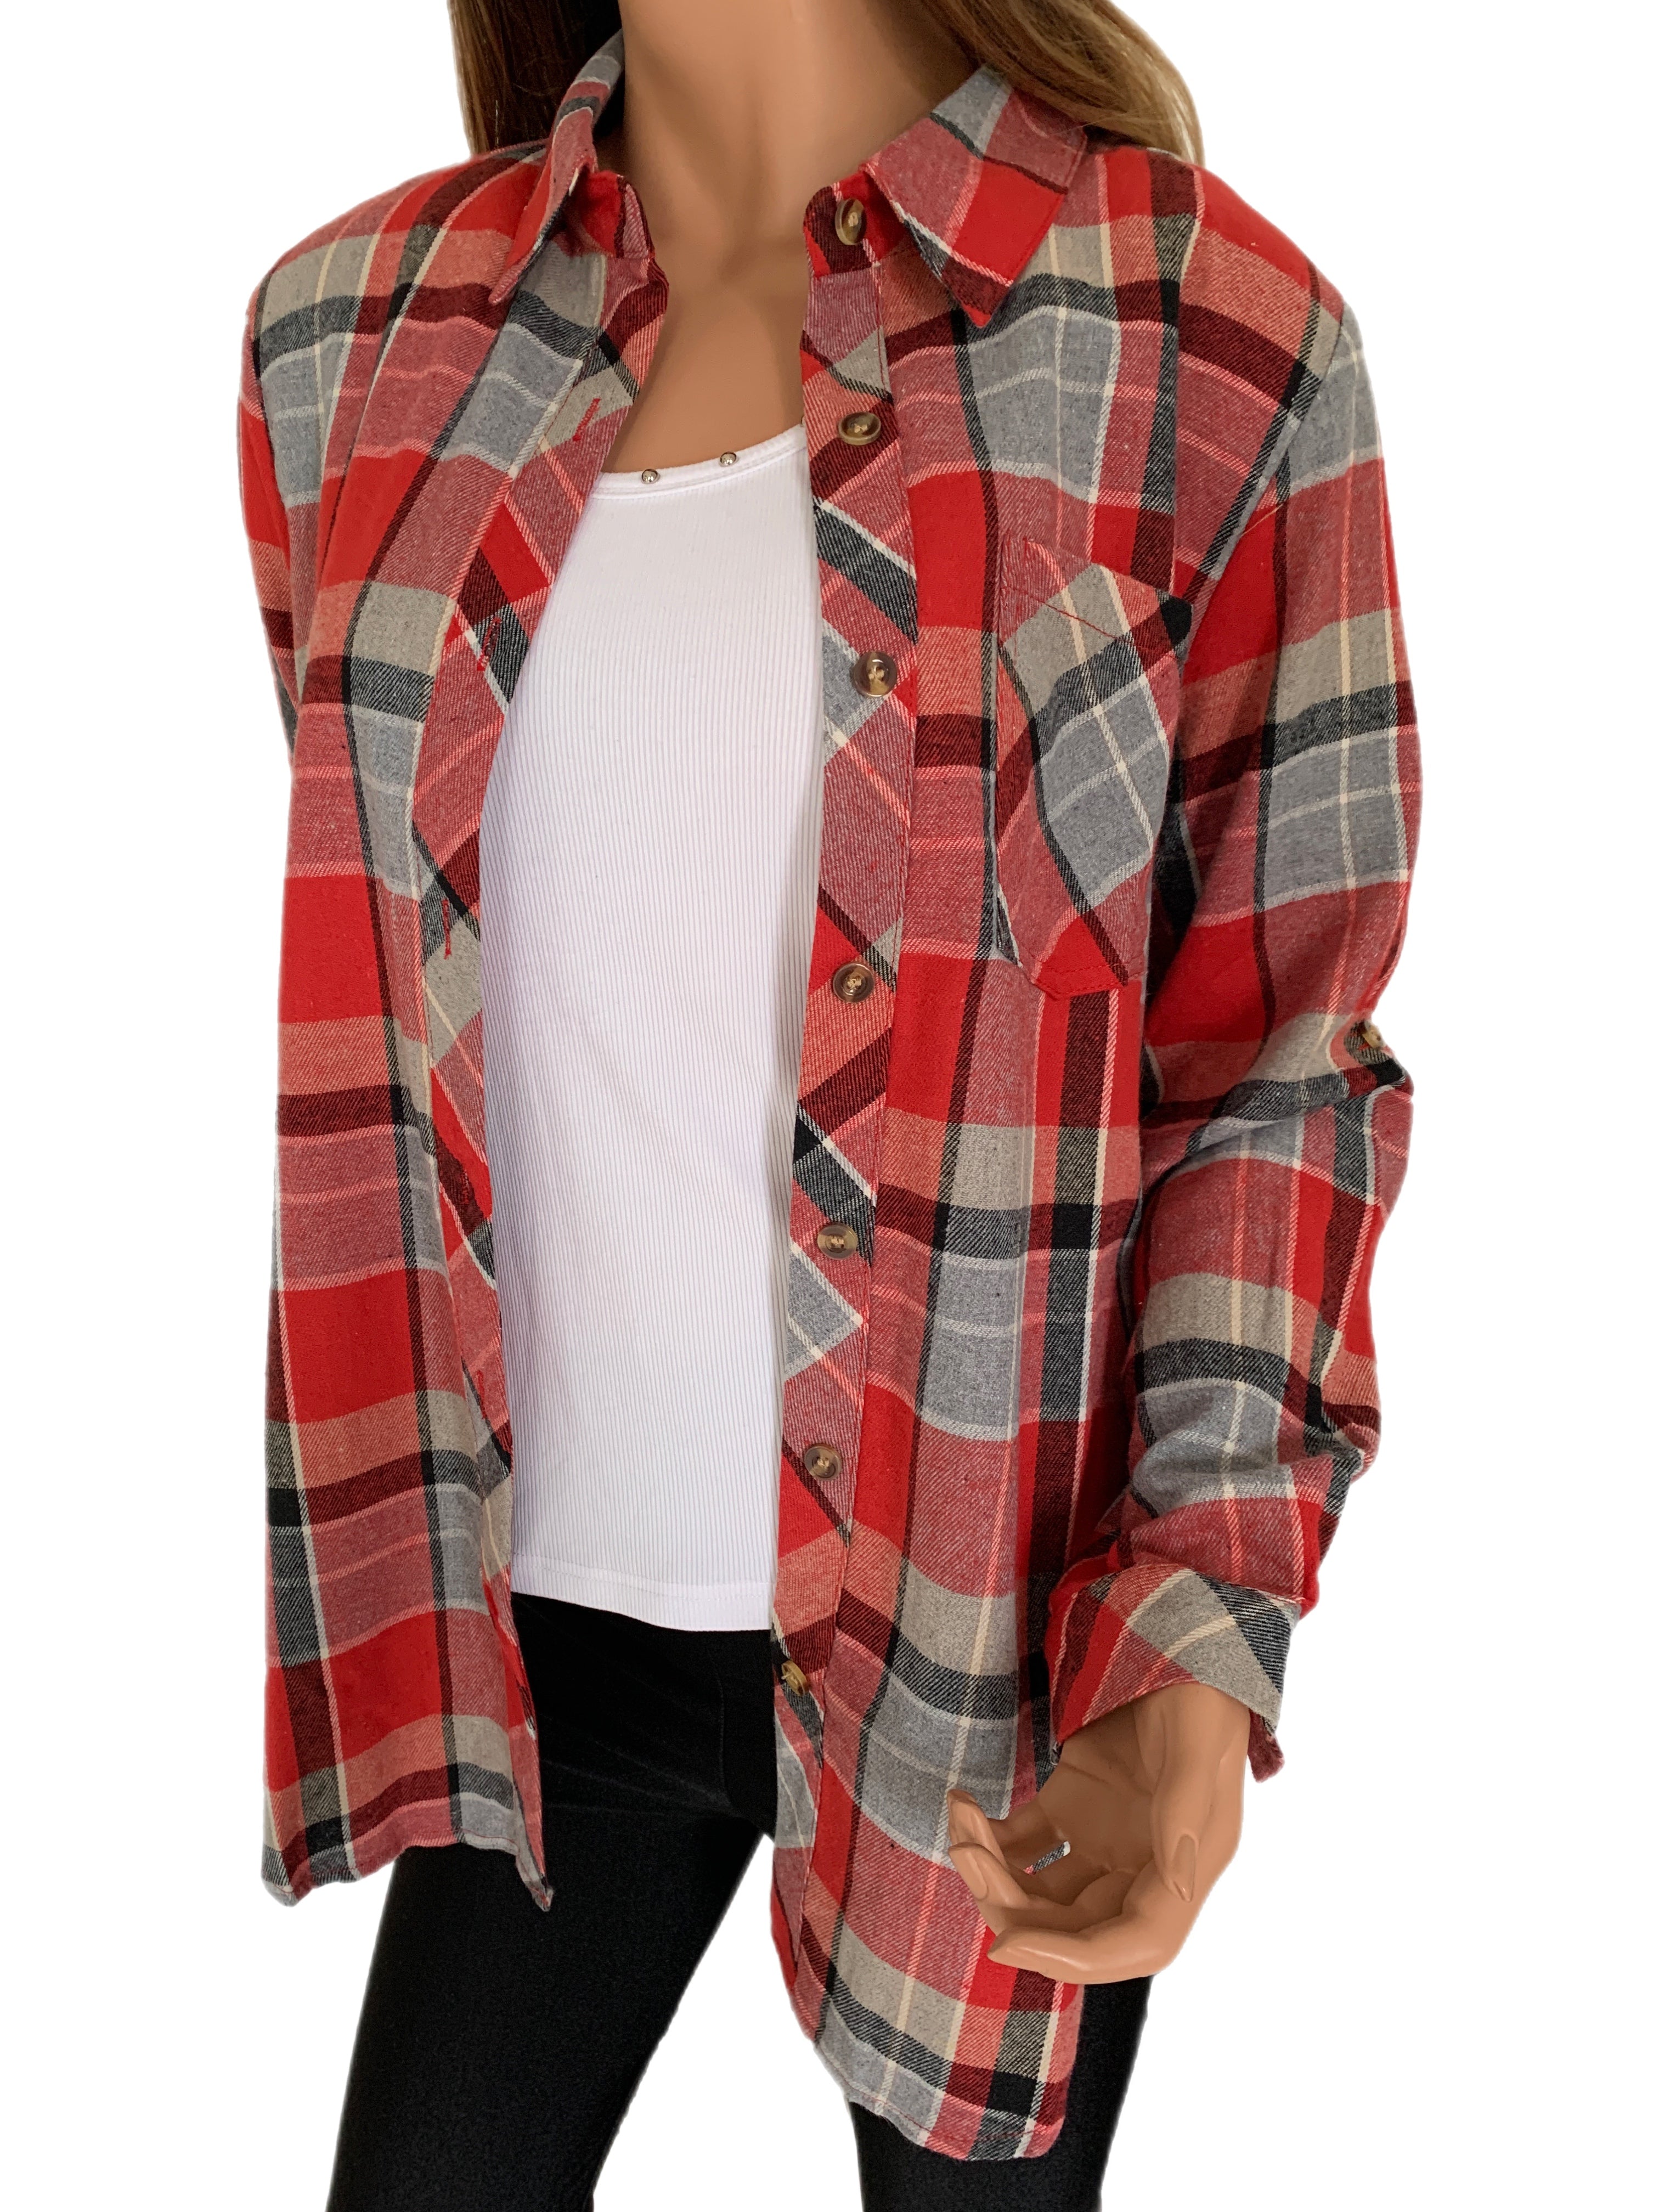 Red Charcoal Plaid Button Up Shirt